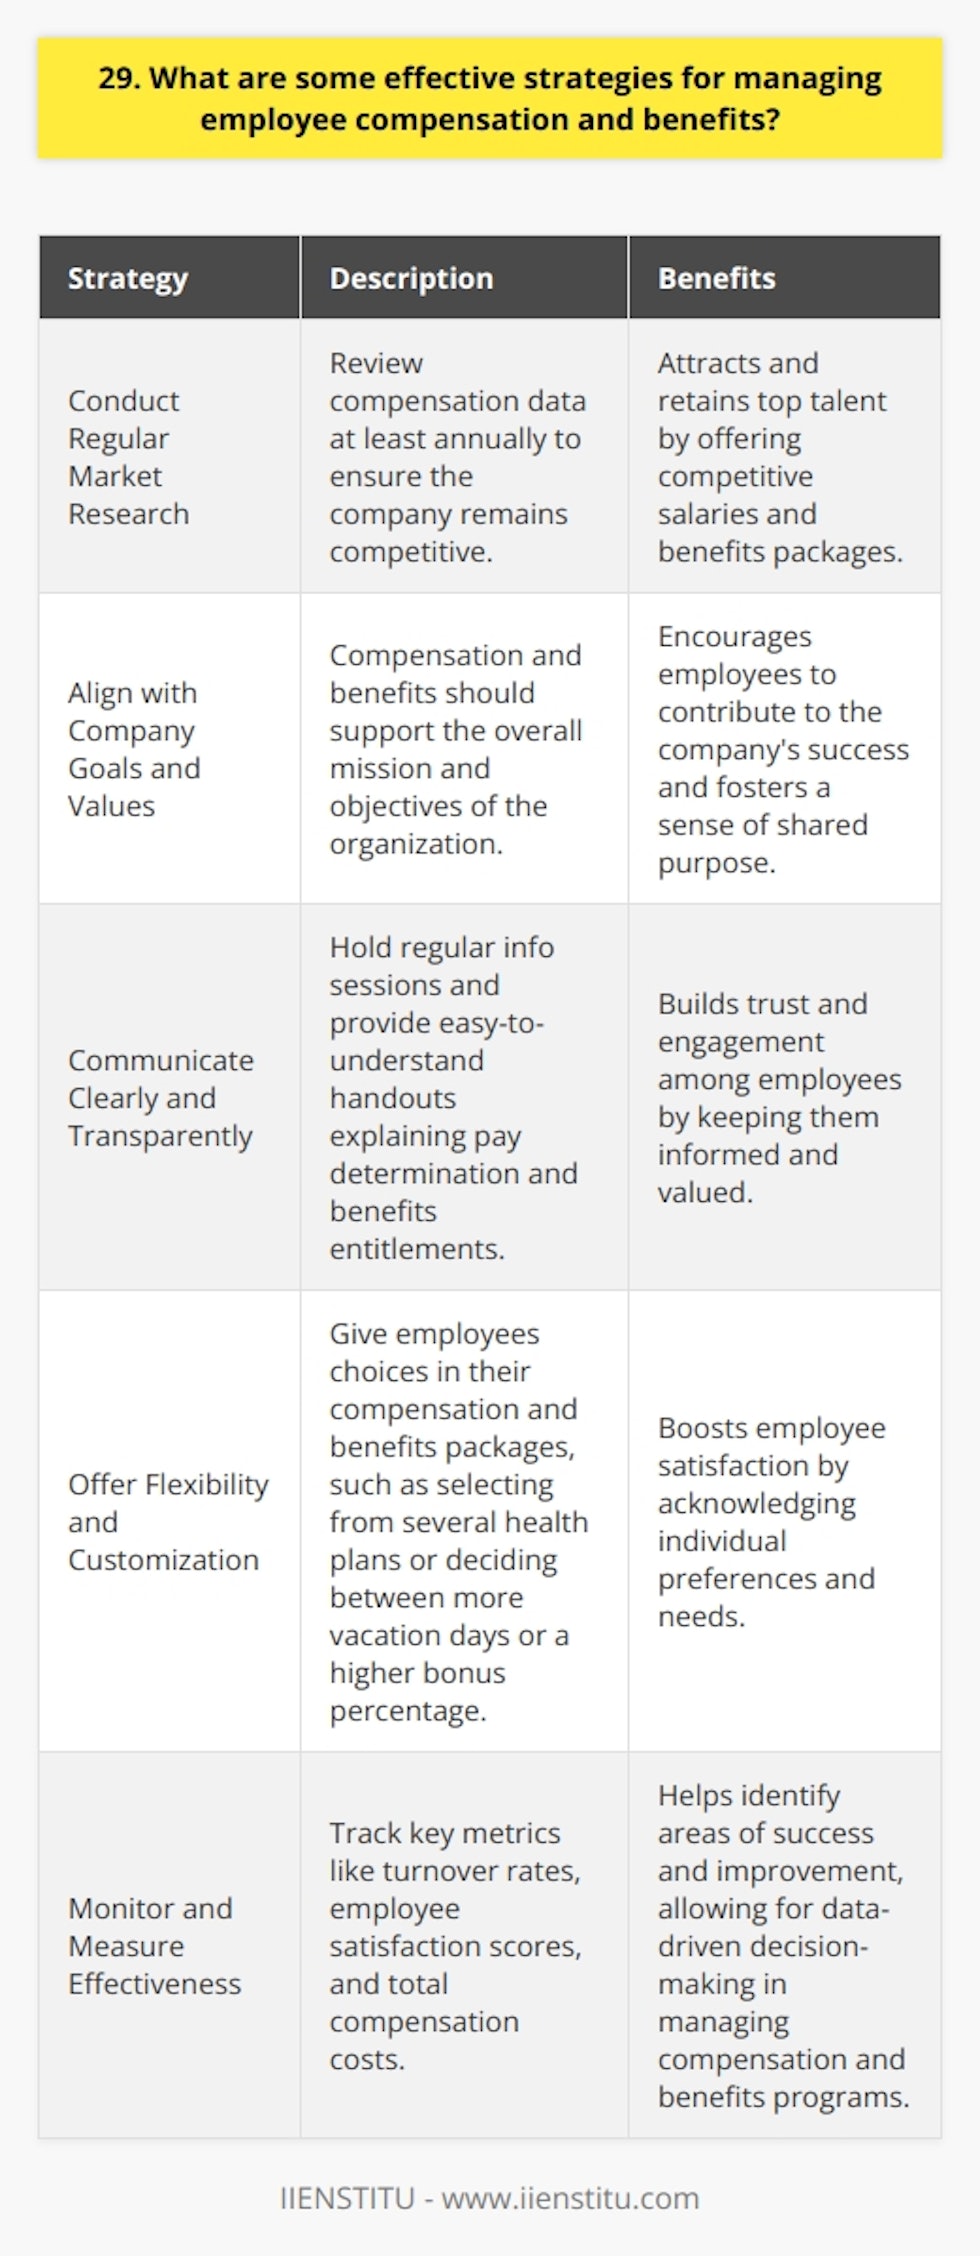 Effective strategies for managing employee compensation and benefits are crucial for attracting and retaining top talent. Here are some approaches Ive found valuable in my experience as an HR manager: Conduct Regular Market Research Staying up-to-date on industry benchmarks for salaries and benefits packages is essential. I make it a point to review compensation data at least annually to ensure our company remains competitive. Align with Company Goals and Values Compensation and benefits should support the overall mission and objectives of the organization. For example, if innovation is a core value, consider offering rewards for employees who generate new ideas that improve processes or products. Communicate Clearly and Transparently Employees appreciate knowing how their pay is determined and what benefits theyre entitled to. Ive found that holding regular info sessions and providing easy-to-understand handouts helps build trust and engagement. Offer Flexibility and Customization One size doesnt fit all when it comes to comp and benefits. Giving employees some choice, like picking from several health plans or deciding between more vacation days or a higher bonus percentage, can boost satisfaction. Monitor and Measure Effectiveness Its important to track key metrics like turnover rates, employee satisfaction scores, and total compensation costs. This data helps identify whats working well and where adjustments may be needed. At the end of the day, thoughtfully designed and well-managed compensation and benefits programs are an investment in your most valuable asset - your people. The extra effort is worth it to build a motivated, loyal team.